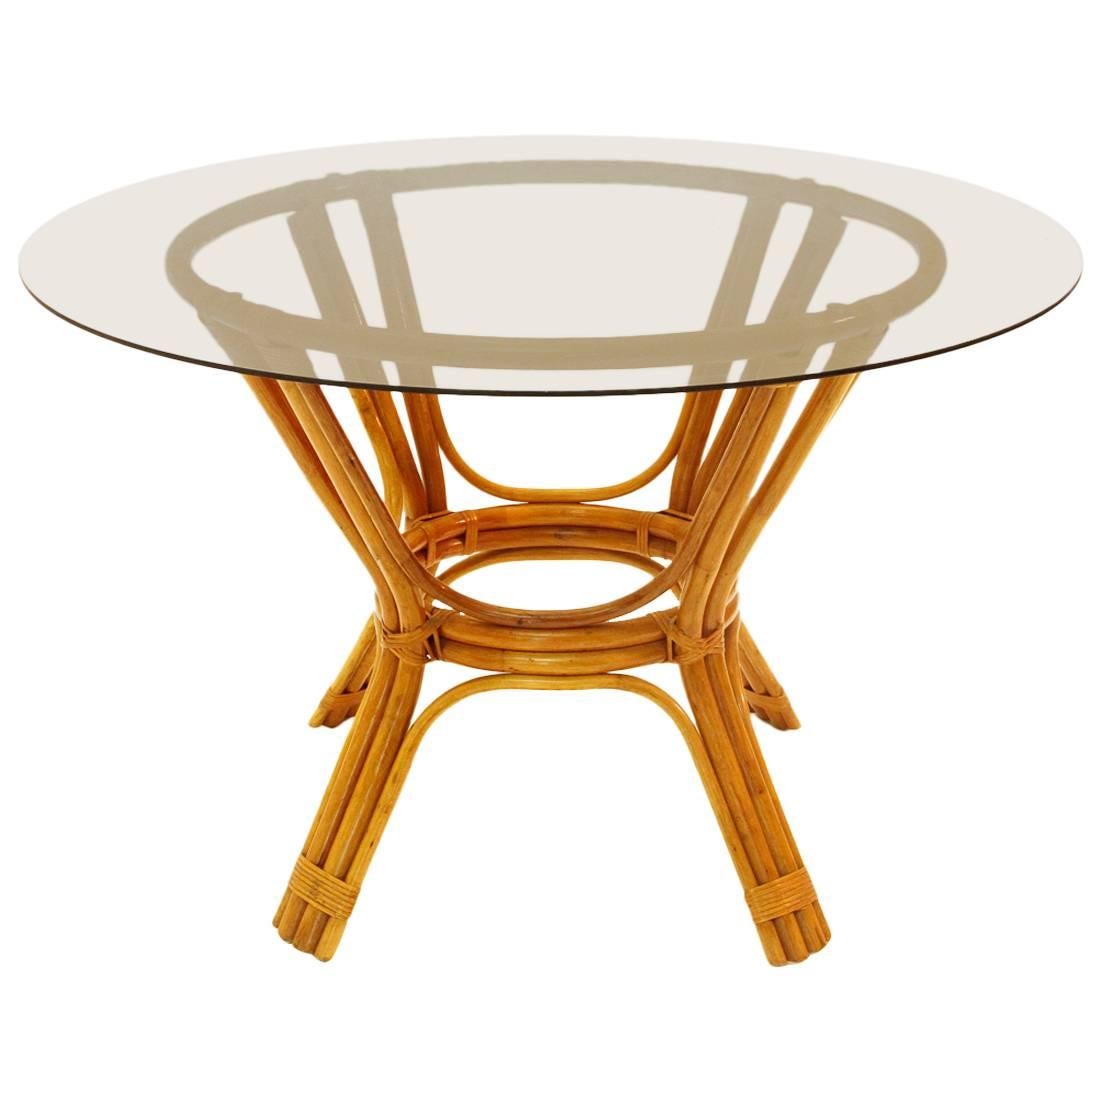 Italian Vintage Bamboo Table with Glass Top, 1970s